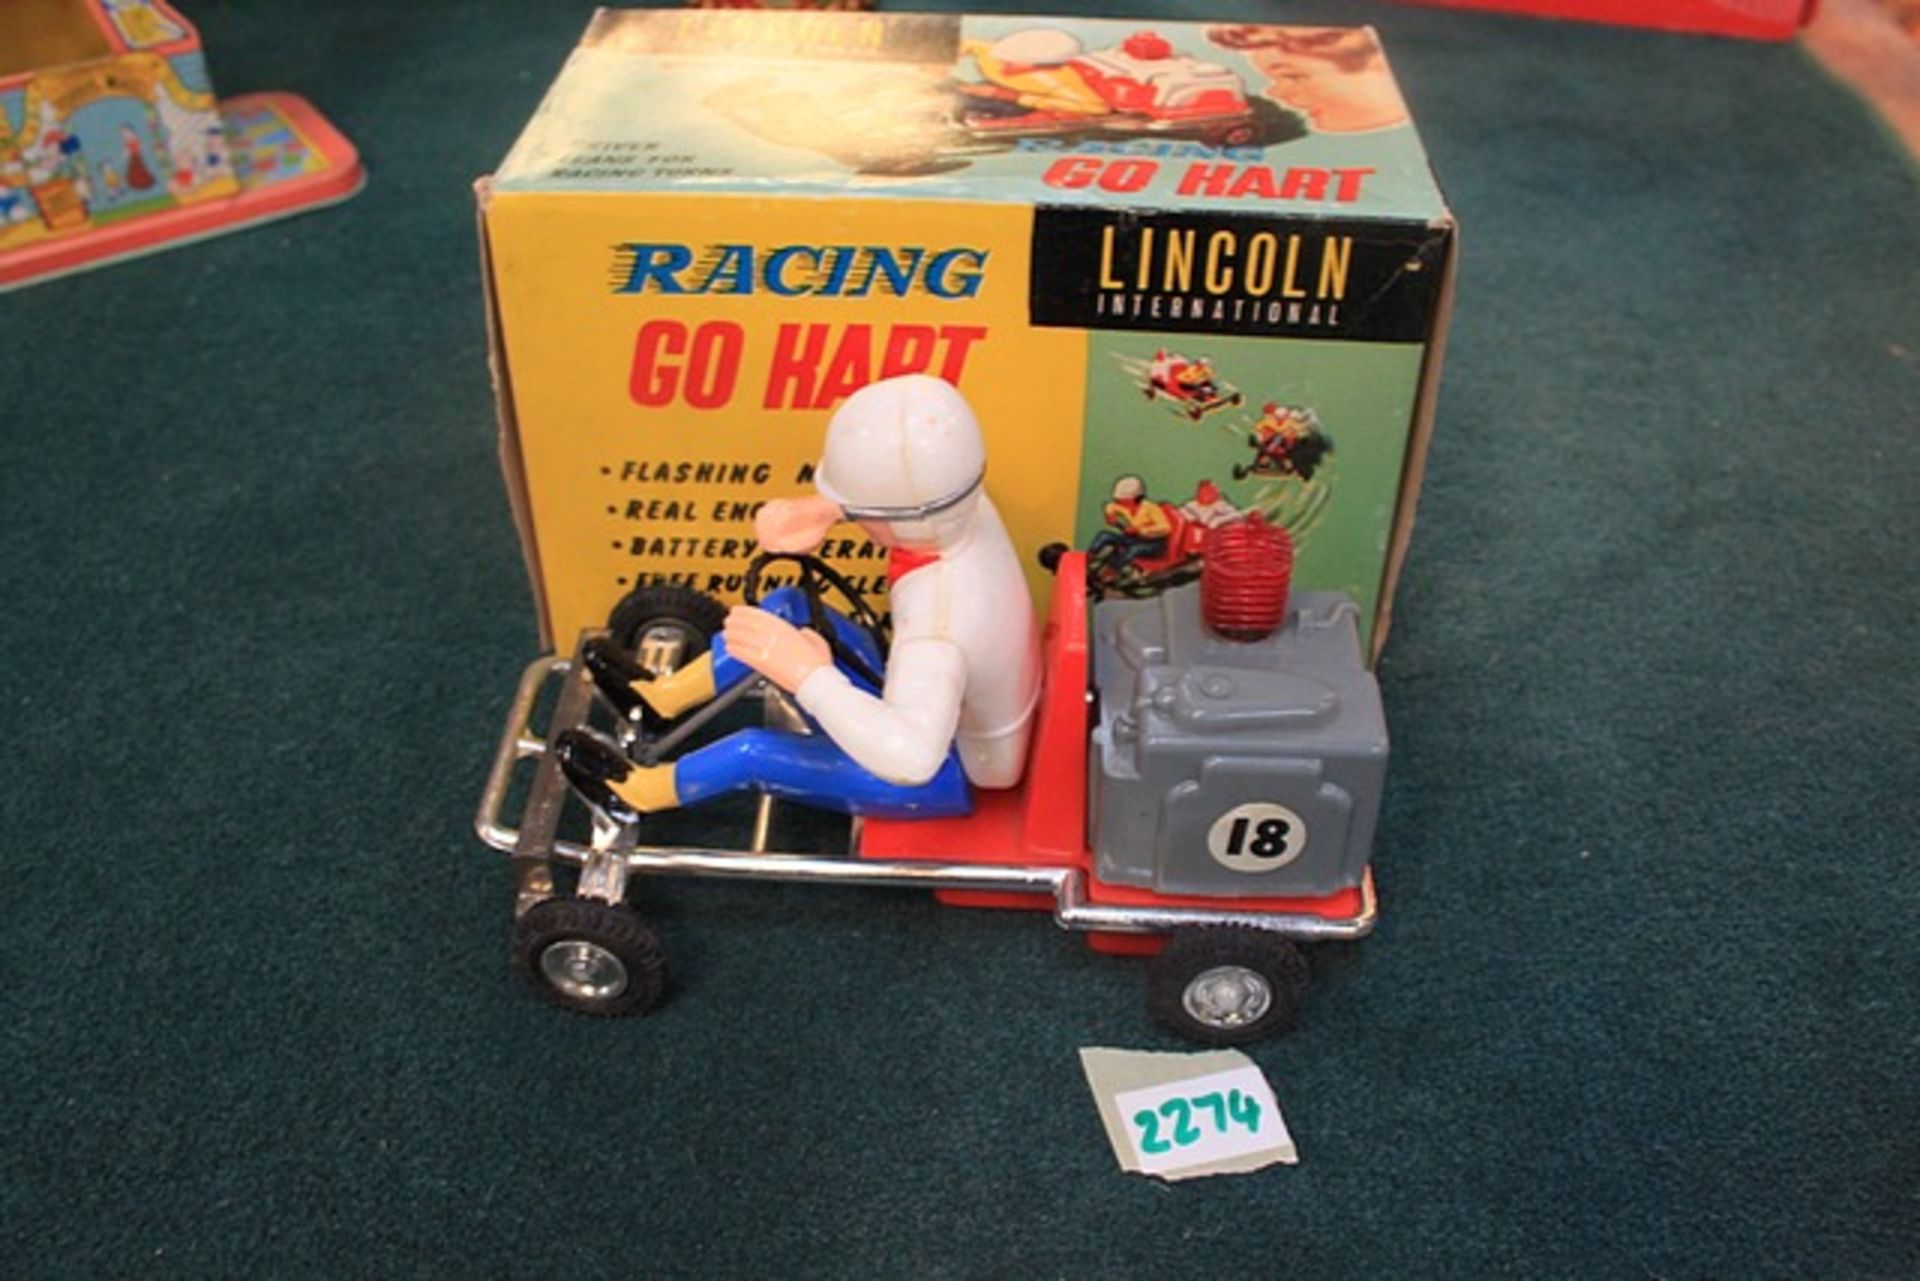 Lincoln International battery operated racing go kart complete with box - Image 2 of 3